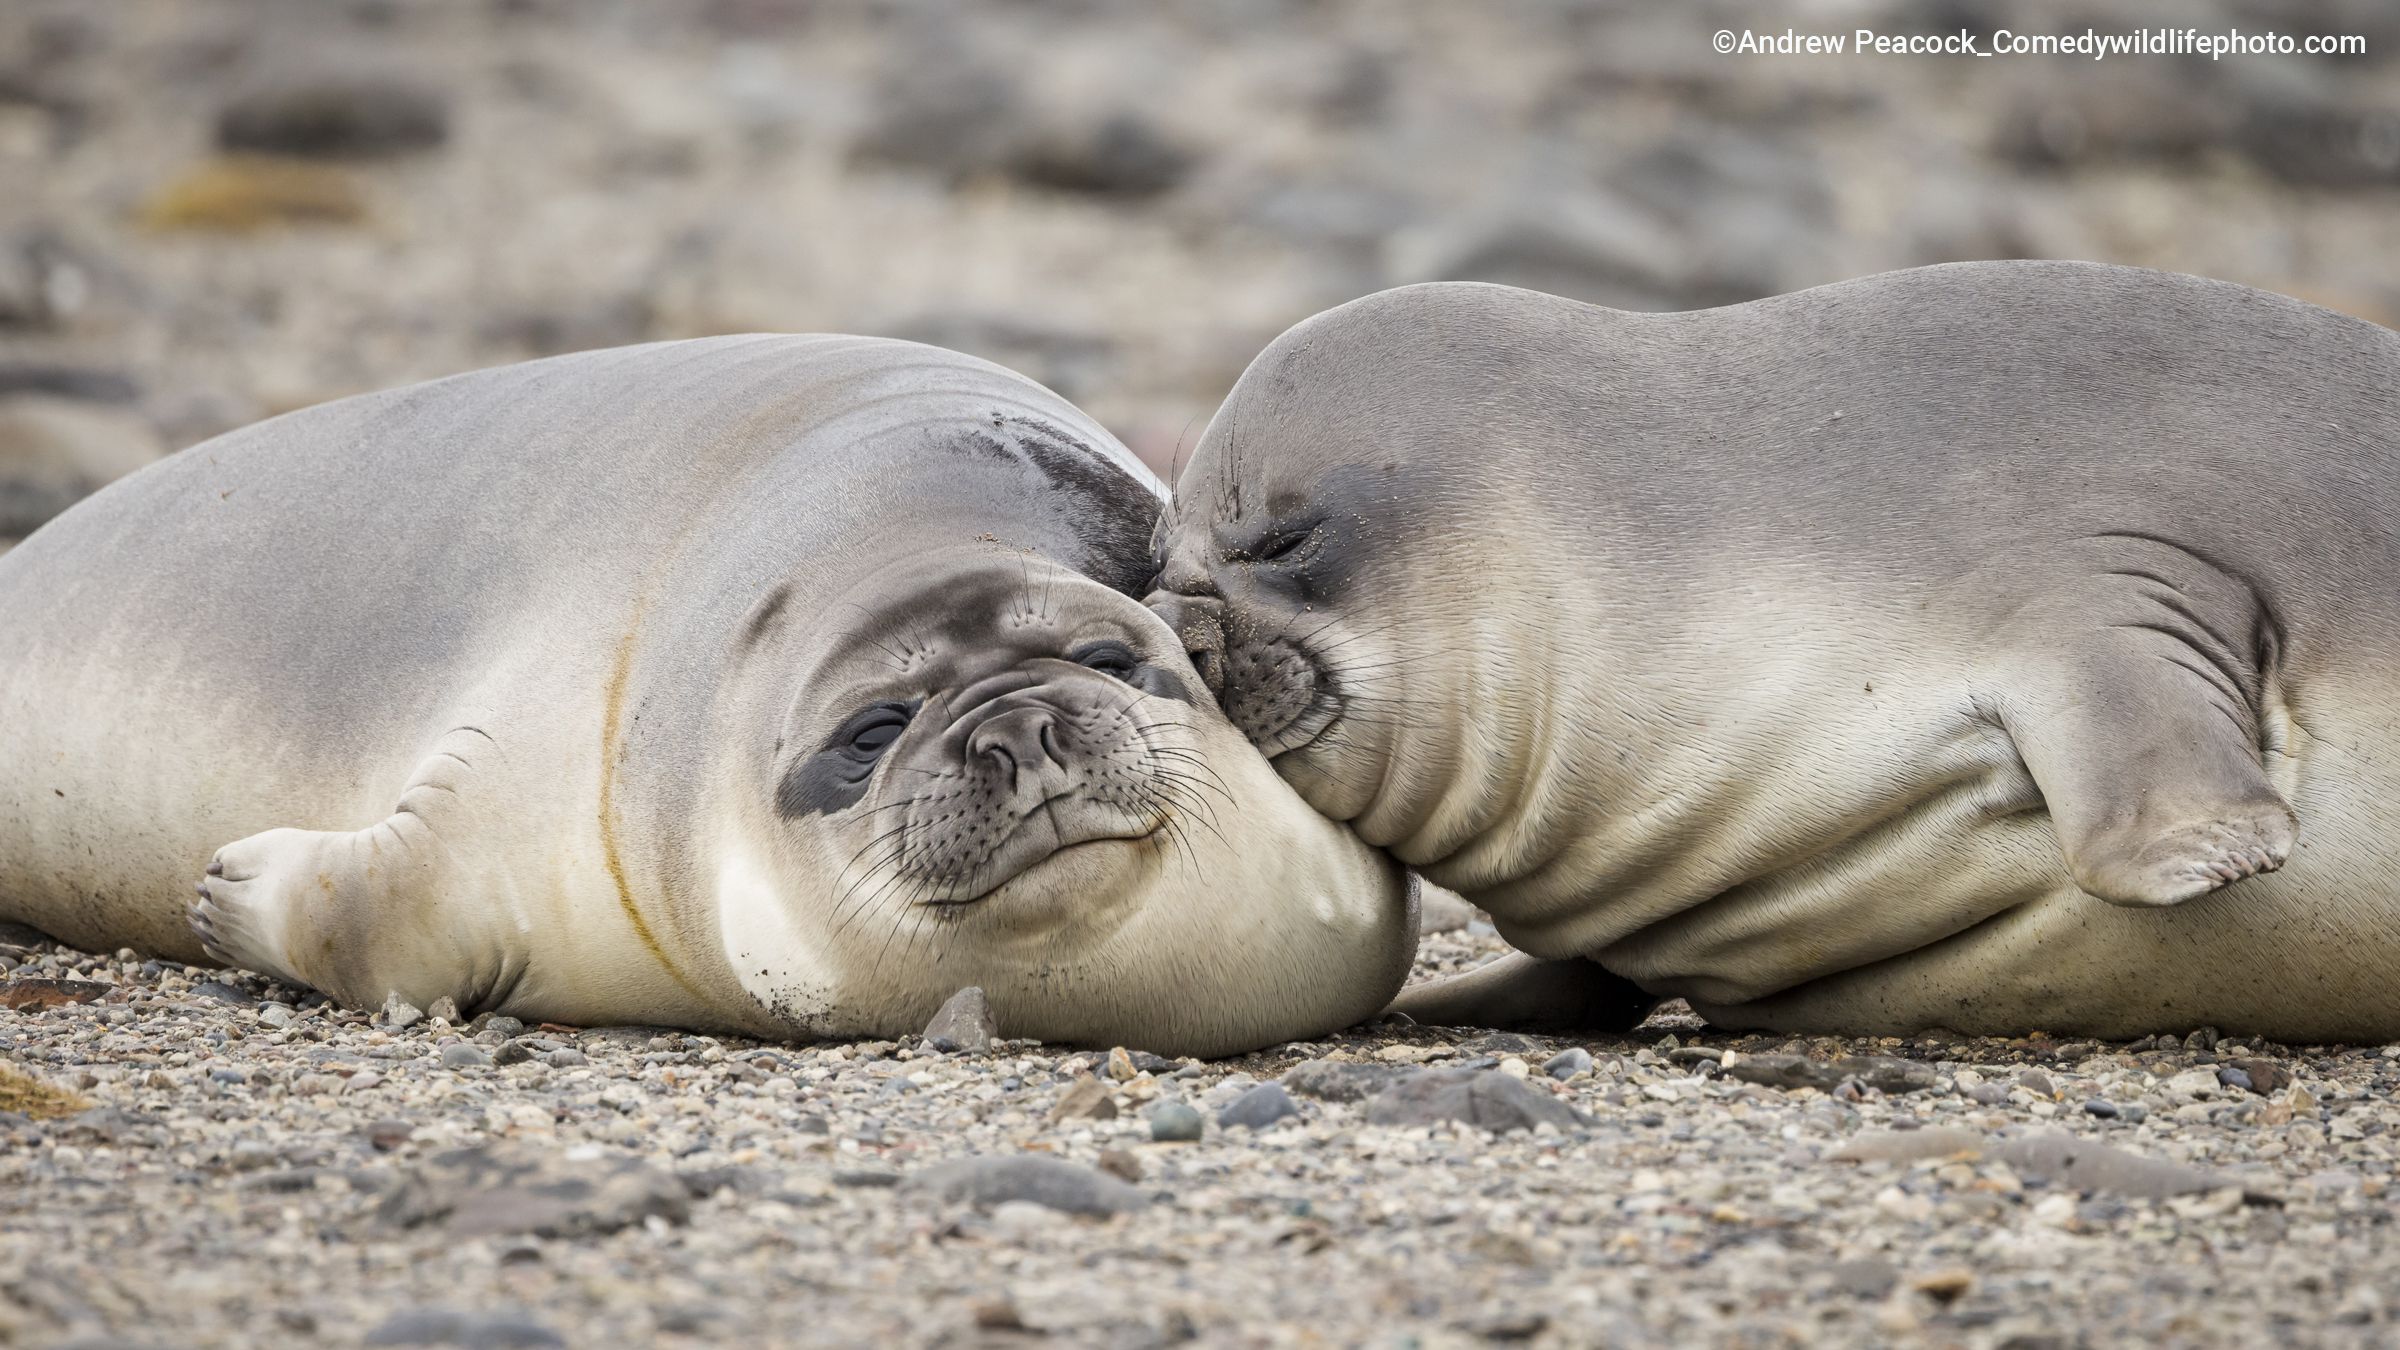 A seal smooshing its face into another seal.